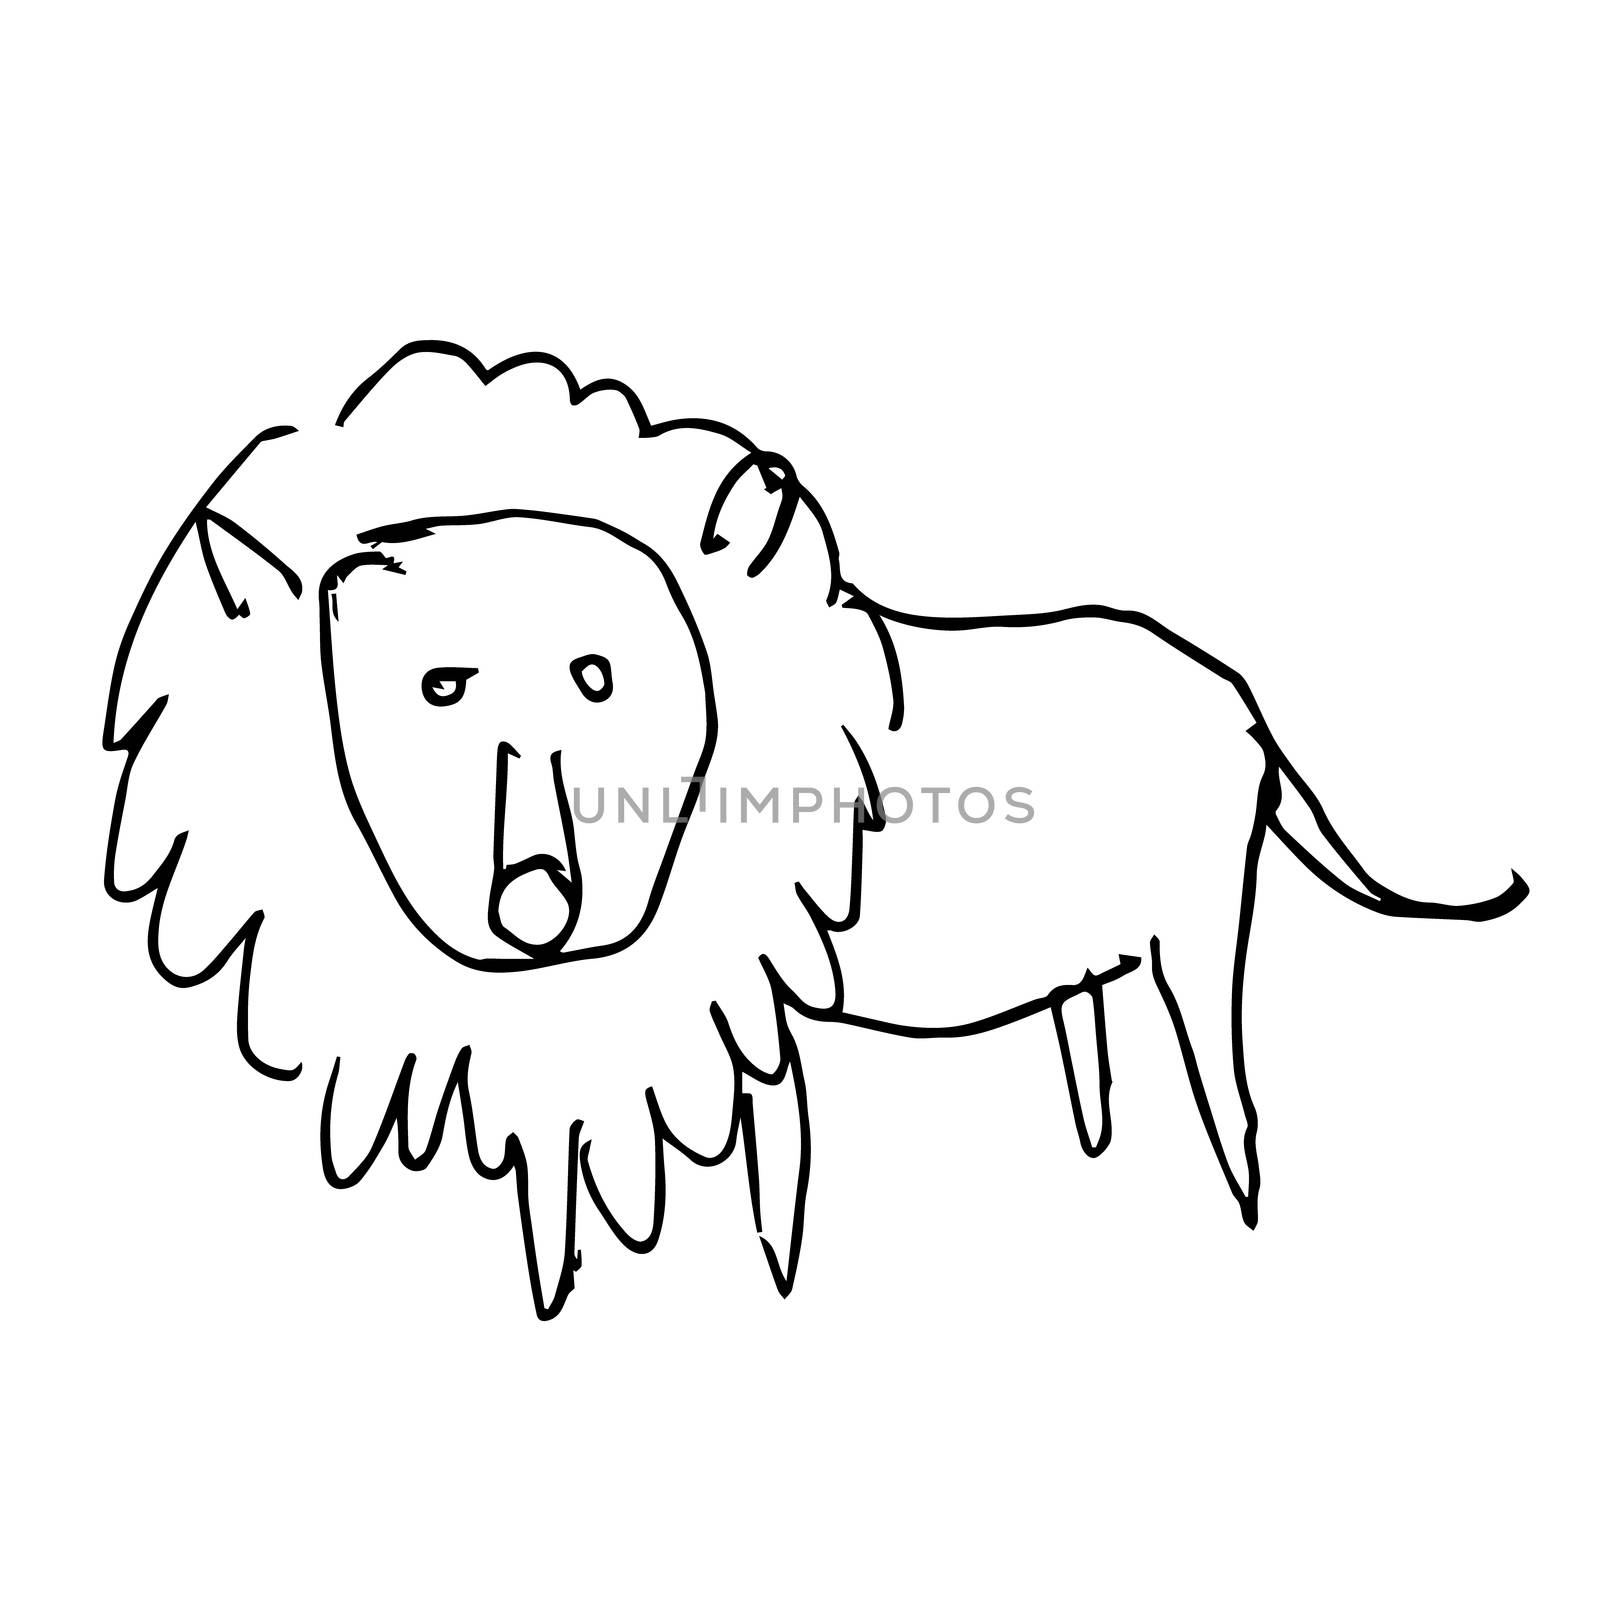  lion doodle hand drawn by simpleBE